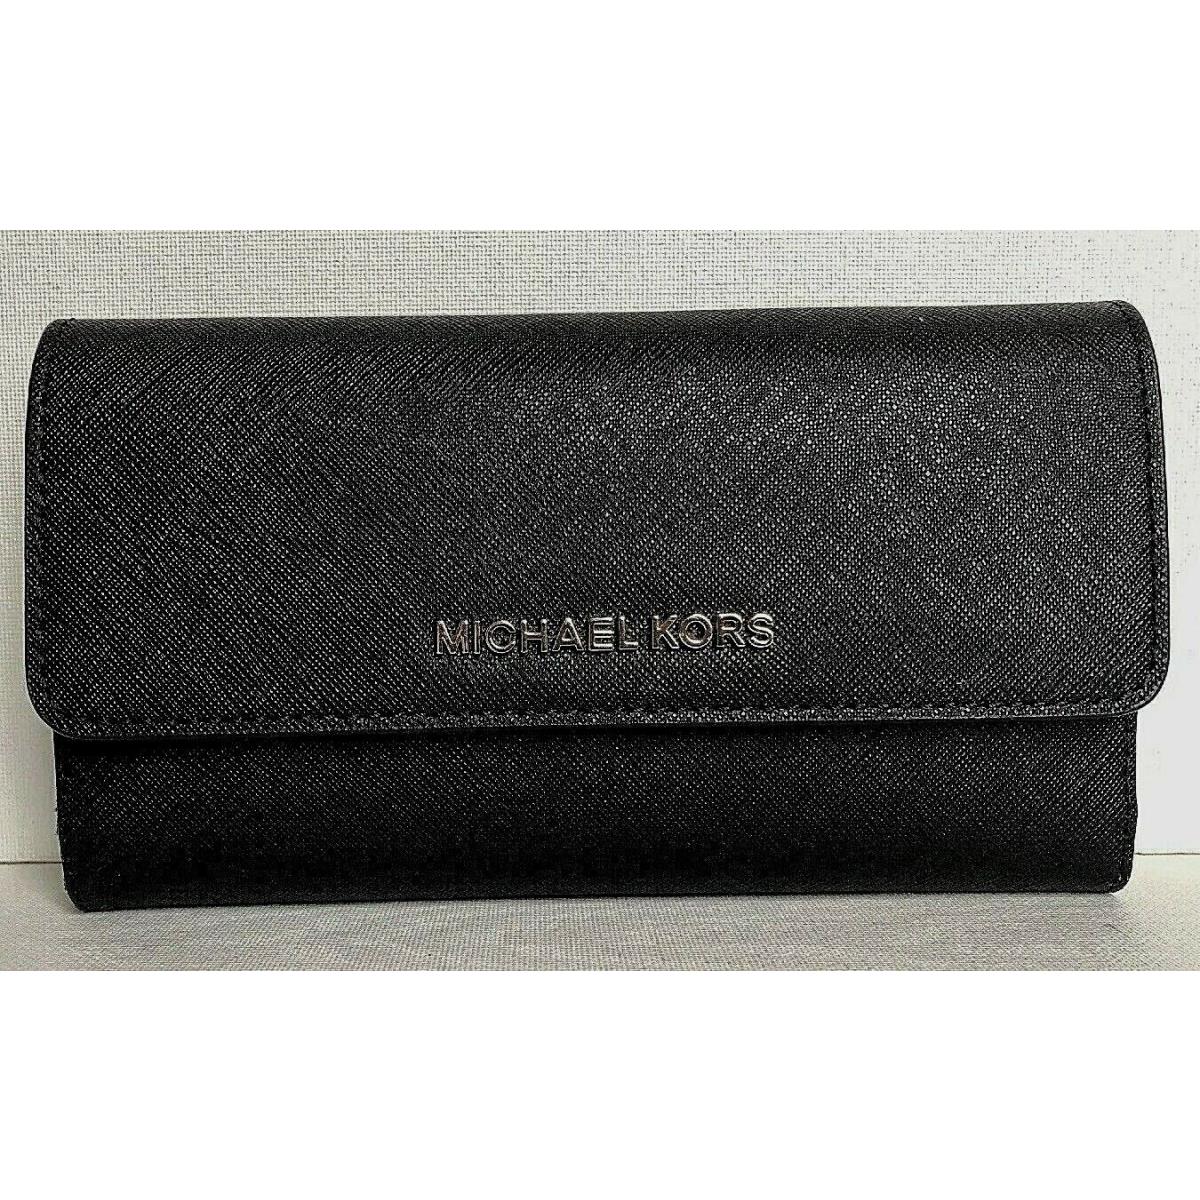 Michael Kors Jet Set Travel Large Trifold Wallet Leather Black with Silver